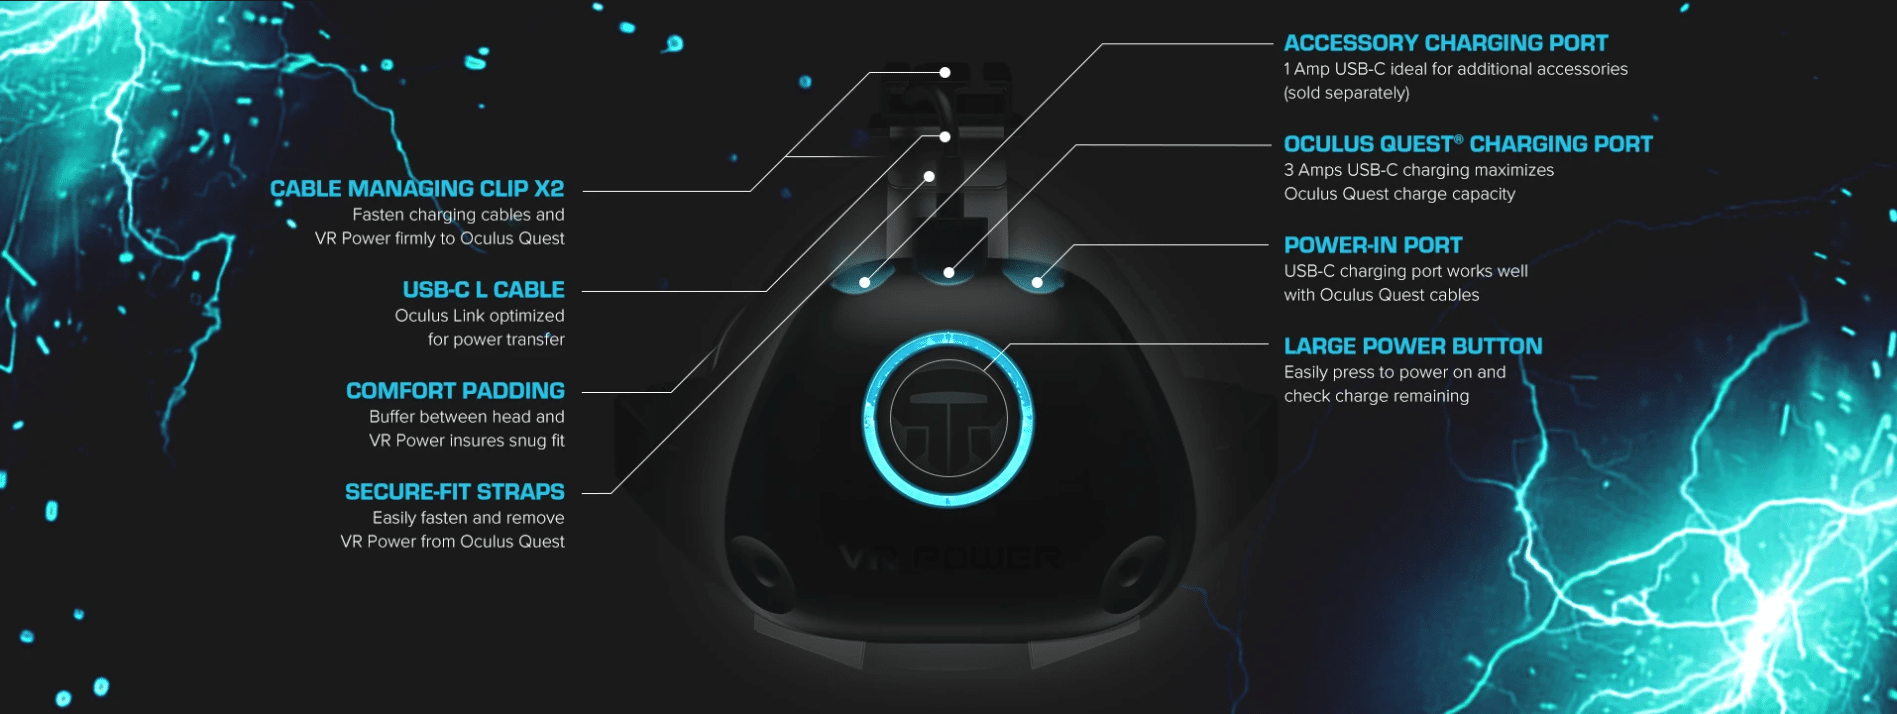 VR Power product details